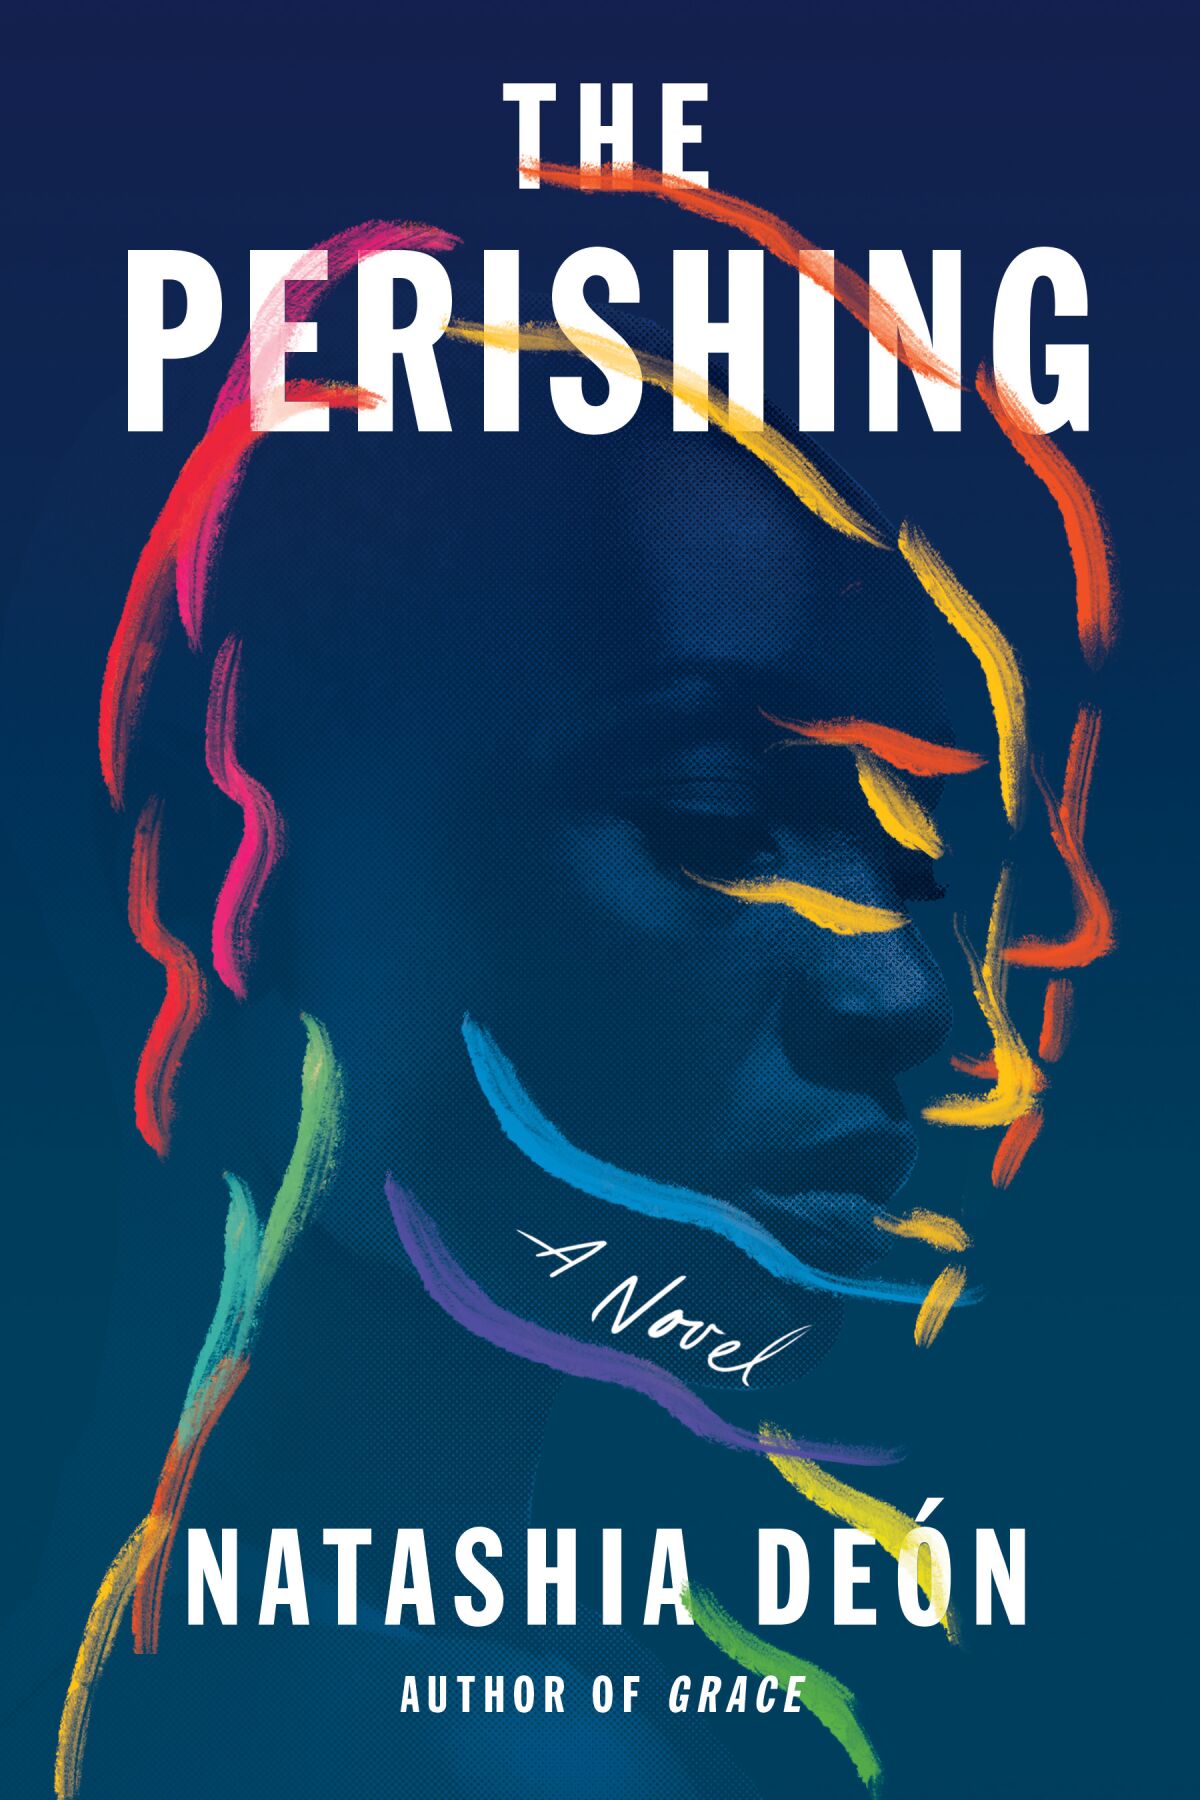 A woman's profile on the cover of "The Perishing" by Natashia Deón